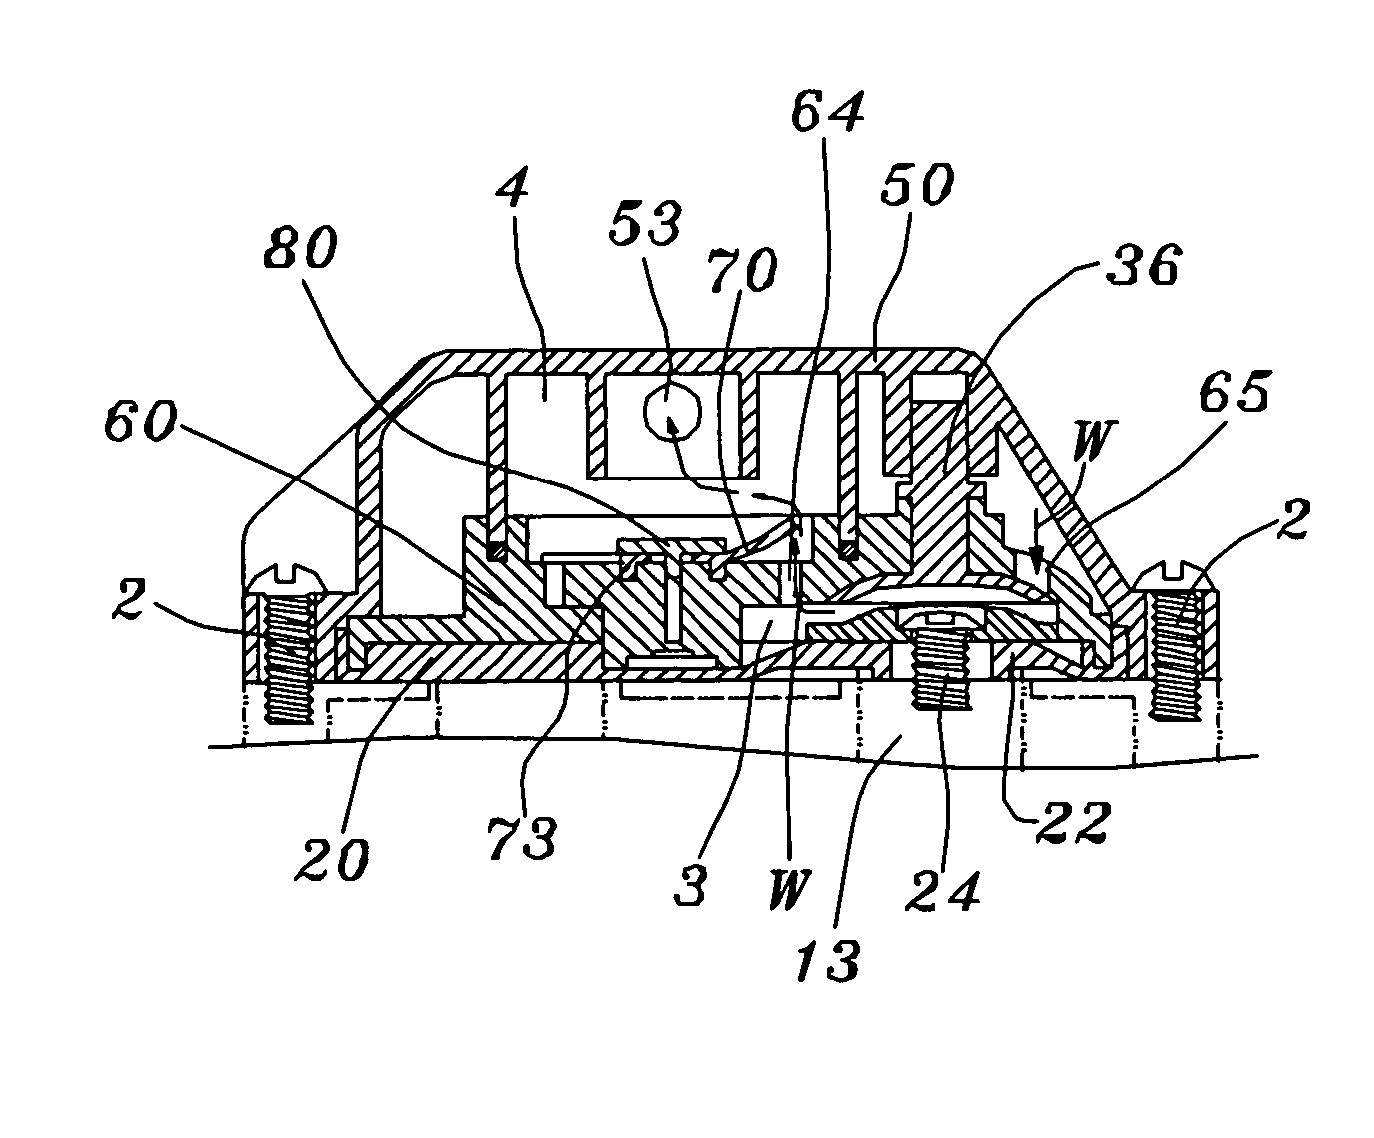 Construction improvement of the piston valve in compressing pump